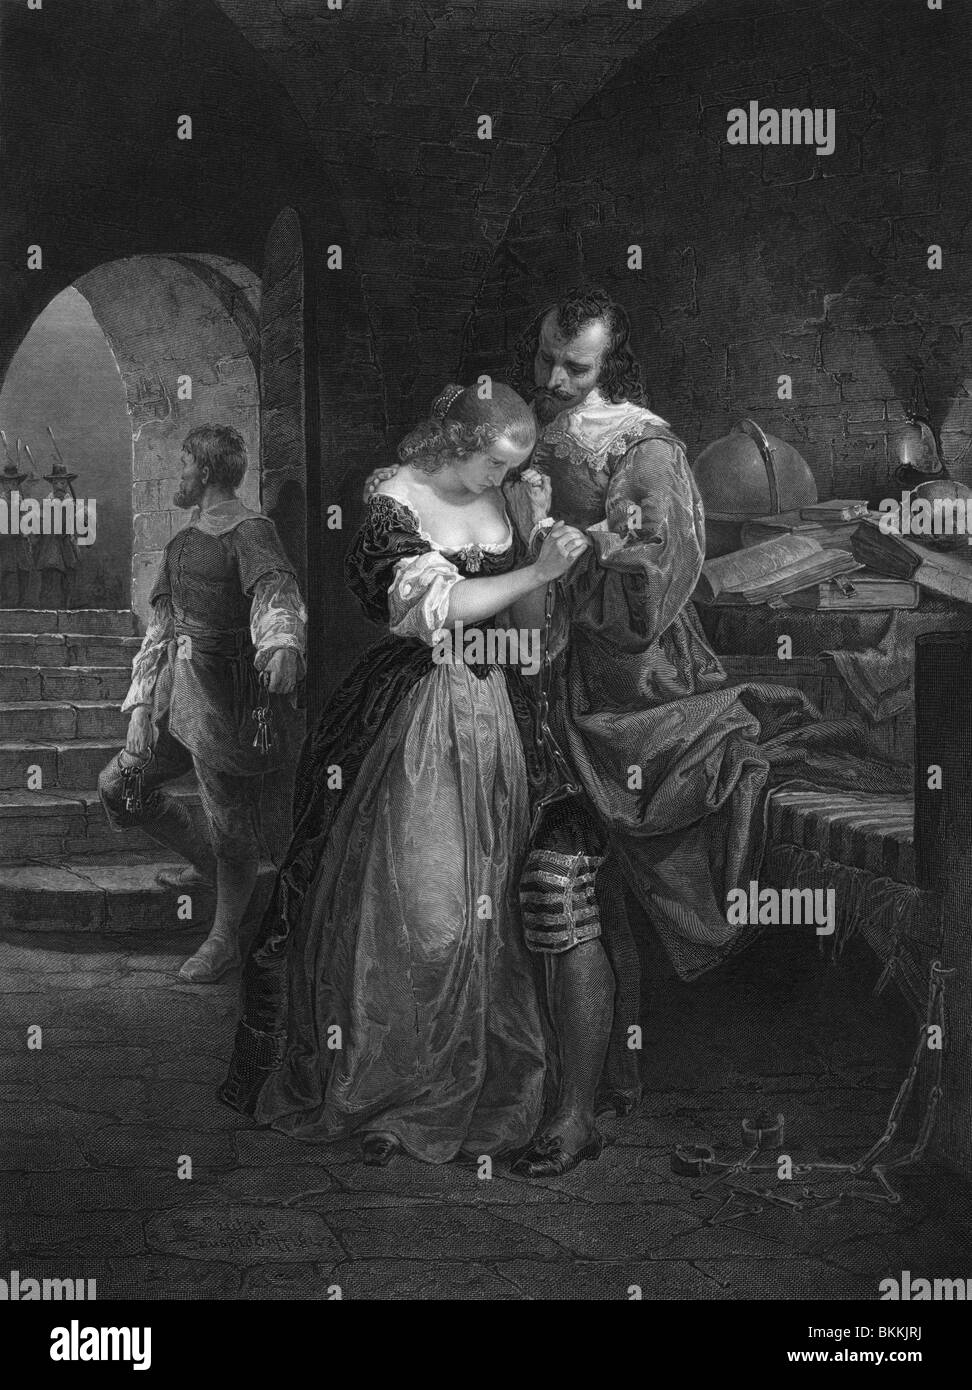 Vintage print depicting Sir Walter Raleigh bidding farewell to his wife on the morning of his execution for treason in 1618. Stock Photo